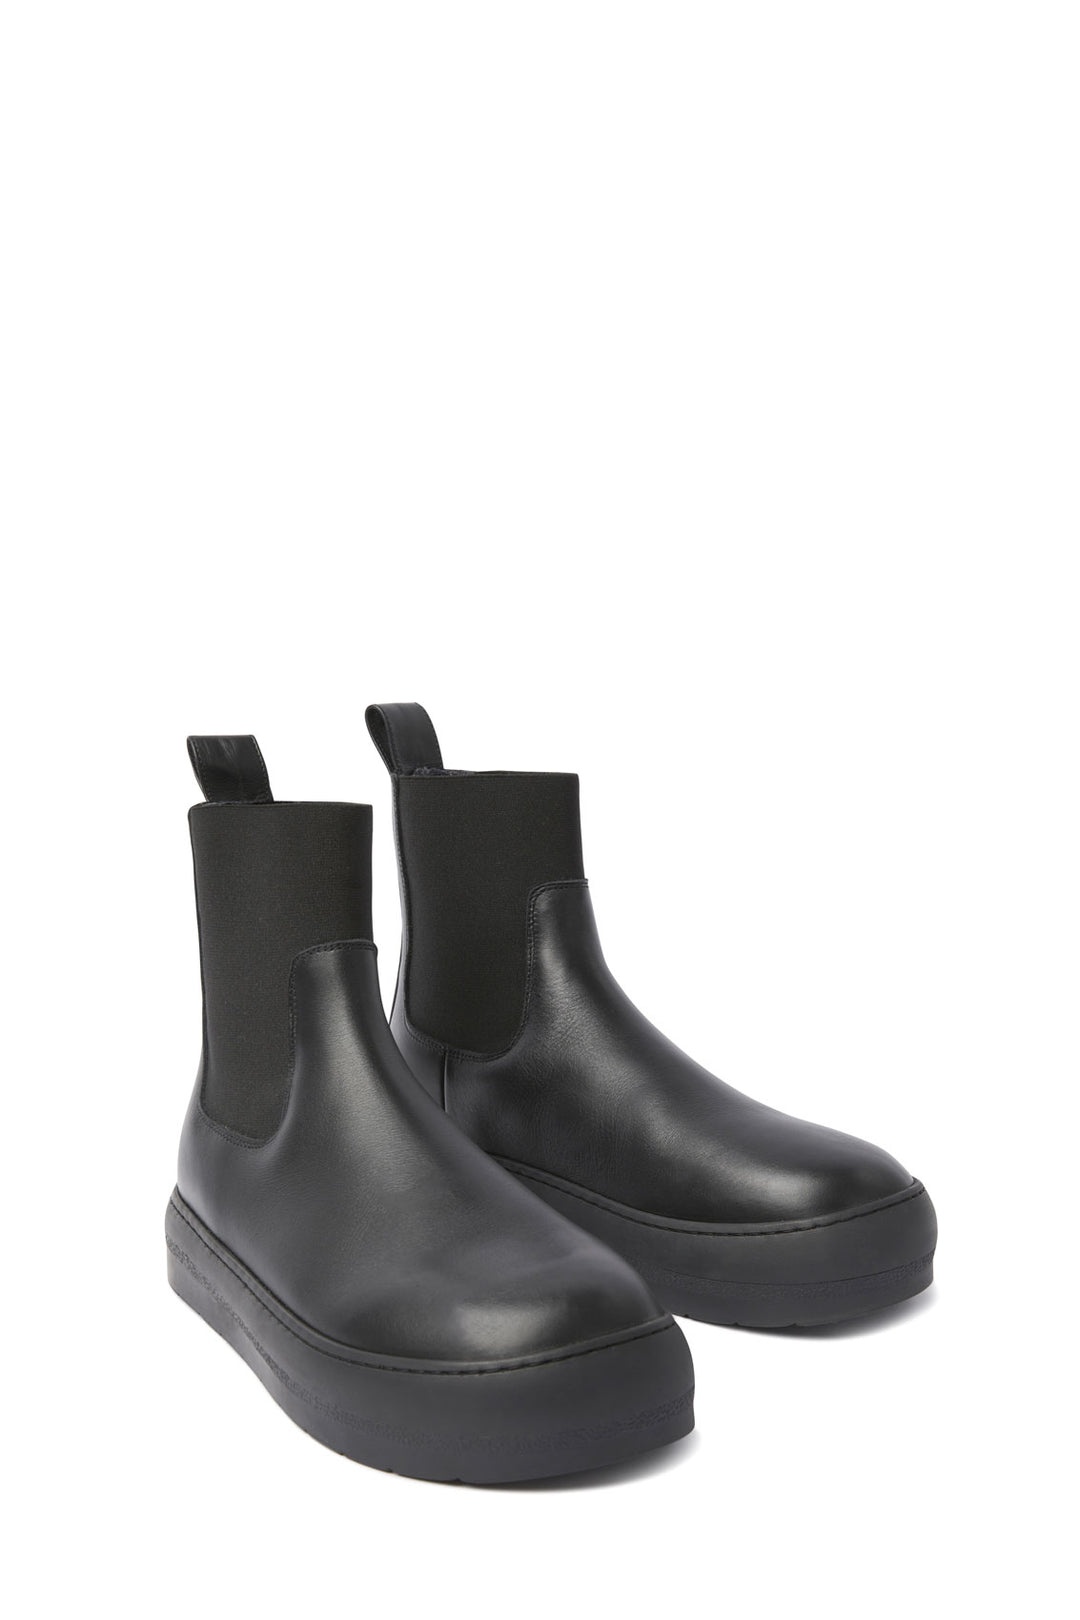 DREAMY ANKLE BOOTS / leather / total black - 2